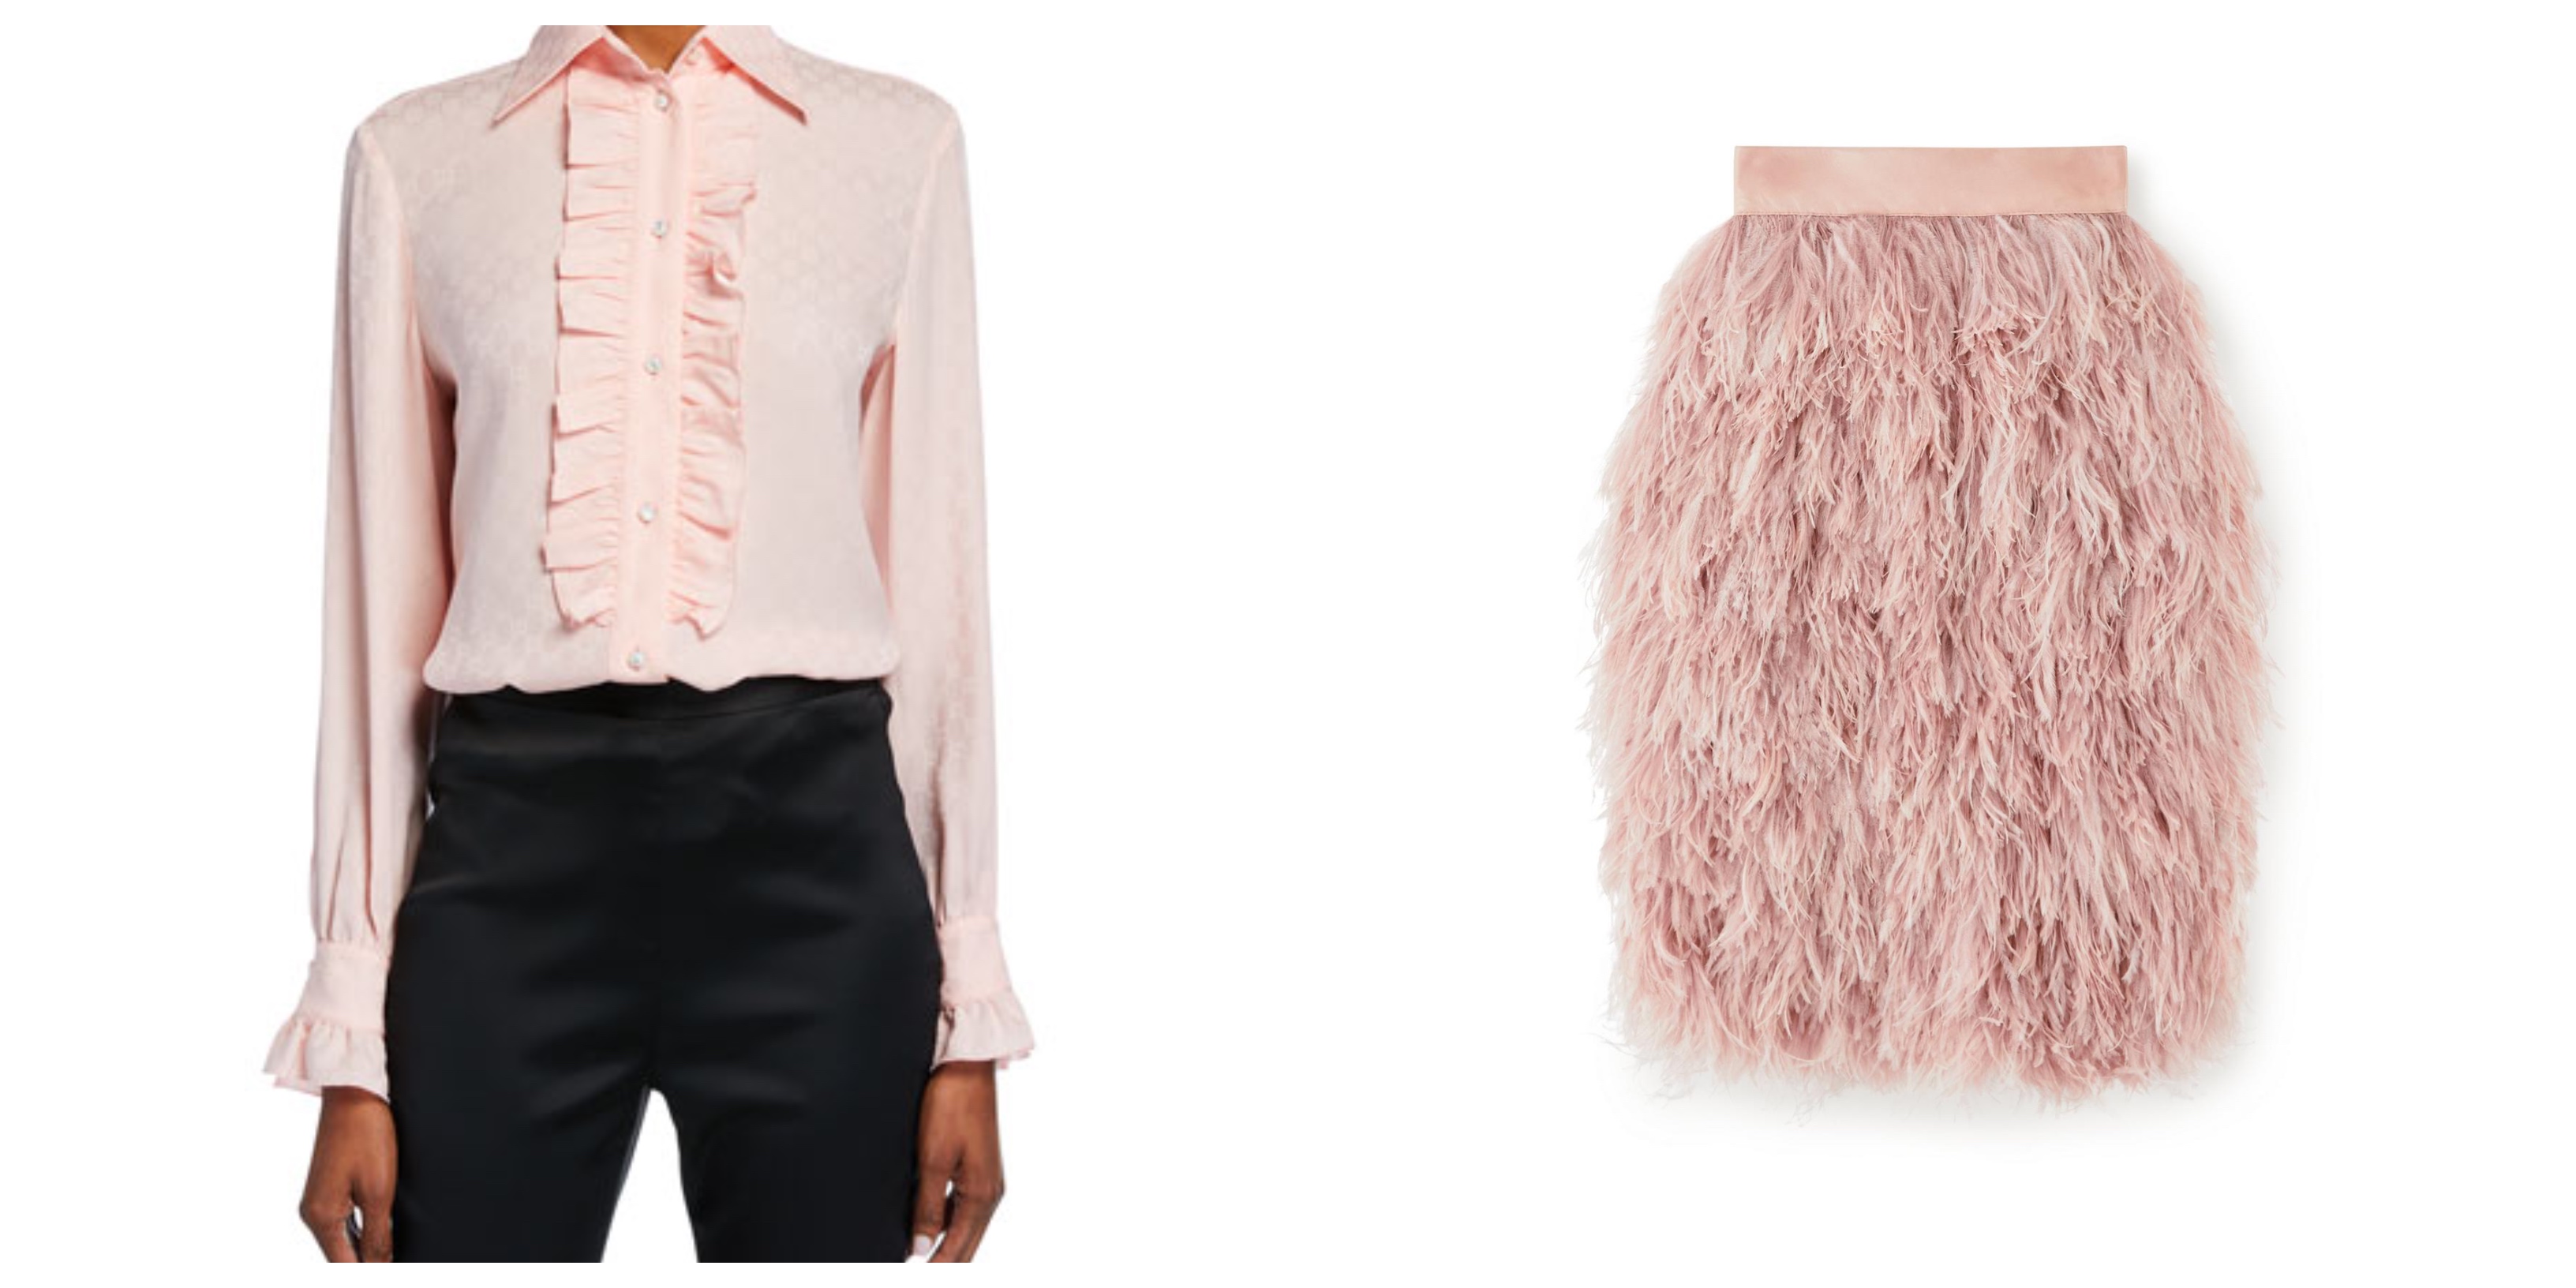 Gucci ruffle blouse and Tom Ford pink feather skirt